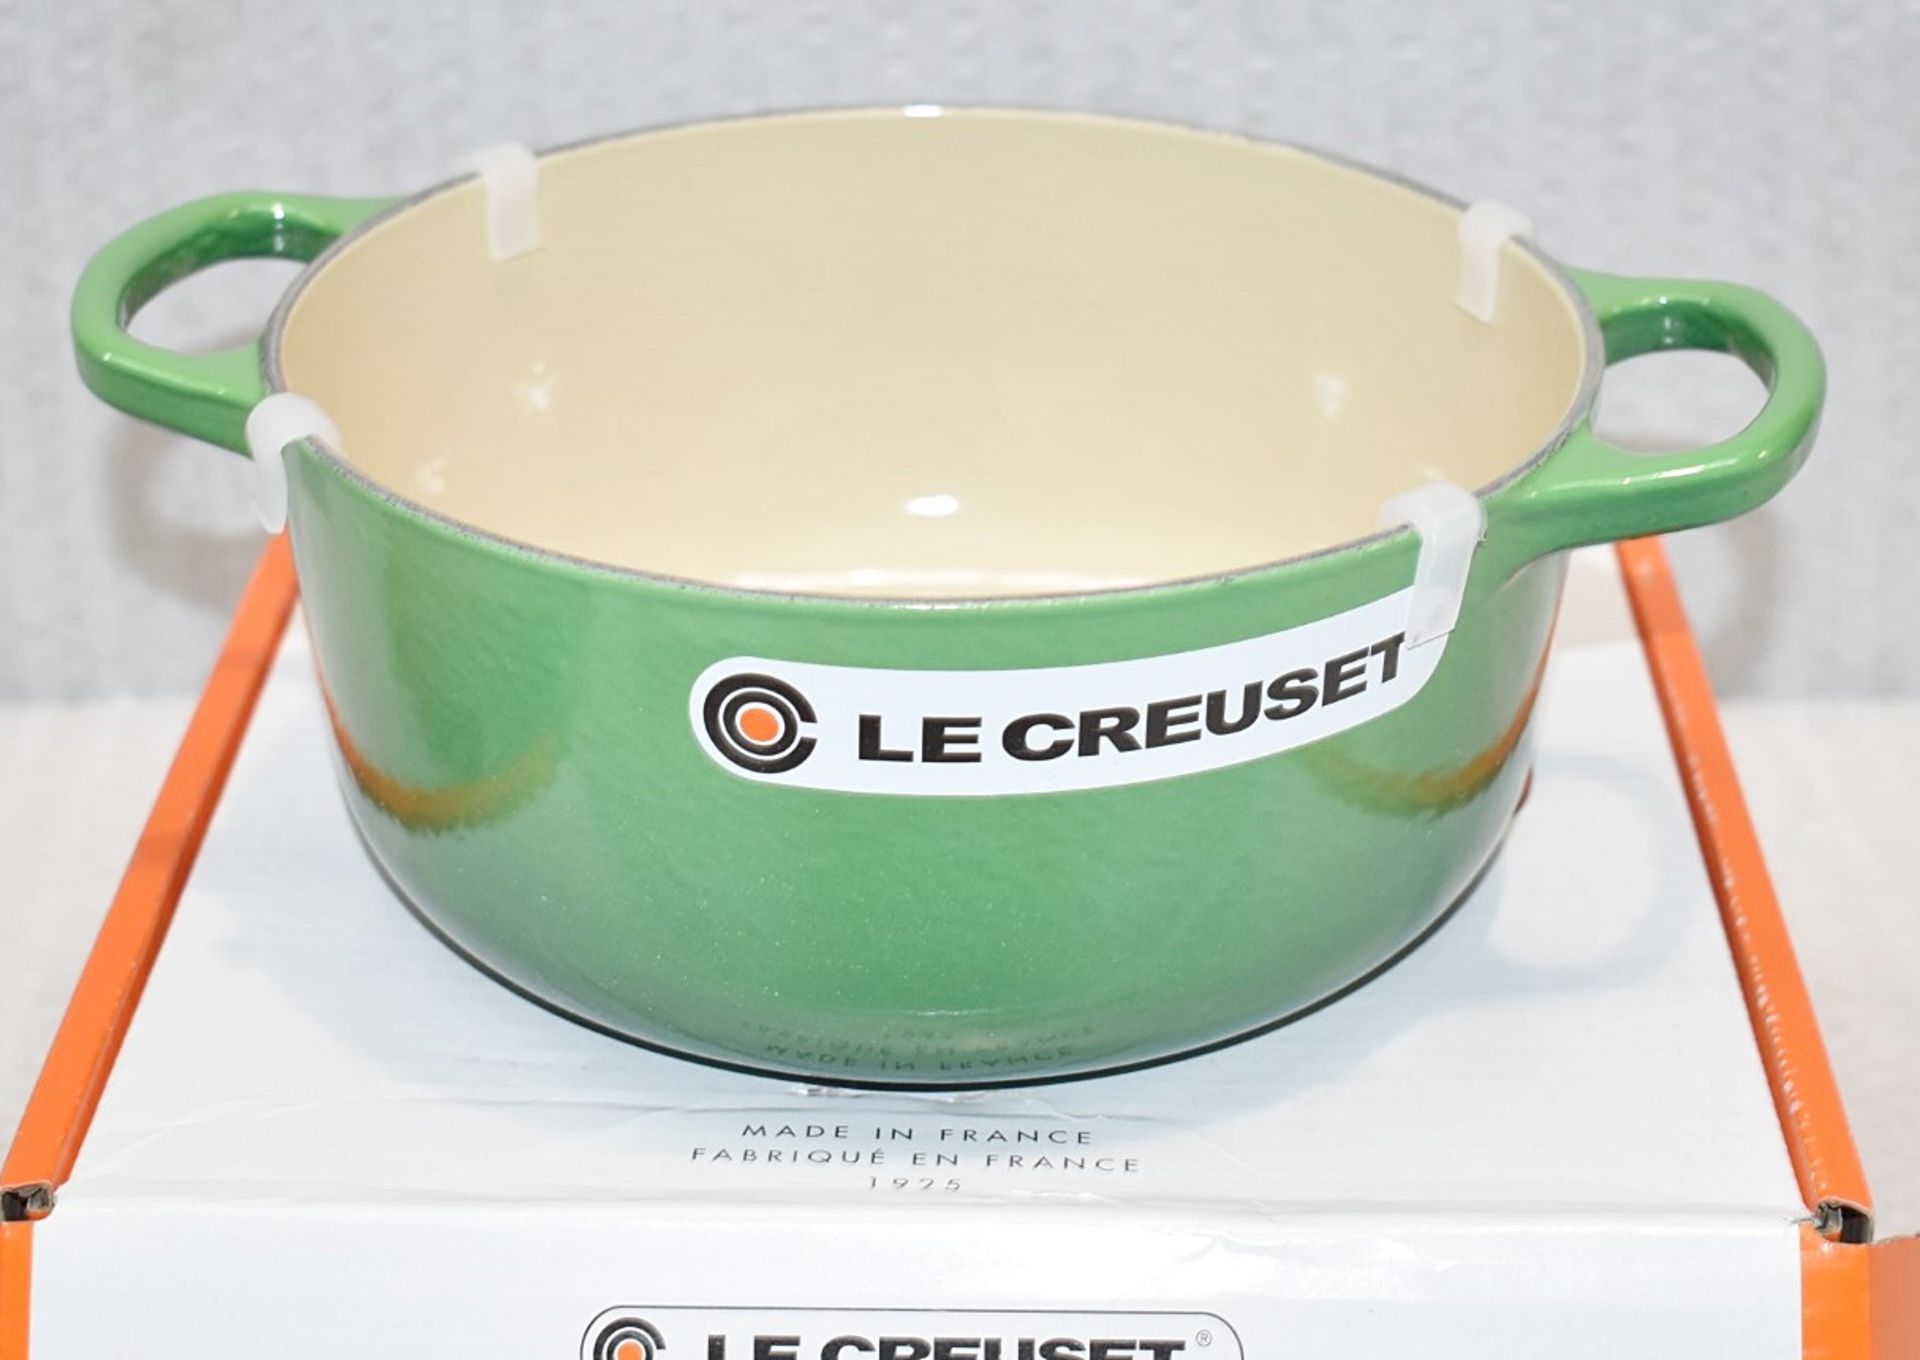 1 x LE CREUSET Enamelled Cast Iron Round Casserole Dish in Bamboo Green (20cm) - RRP £215.00 - Image 16 of 16